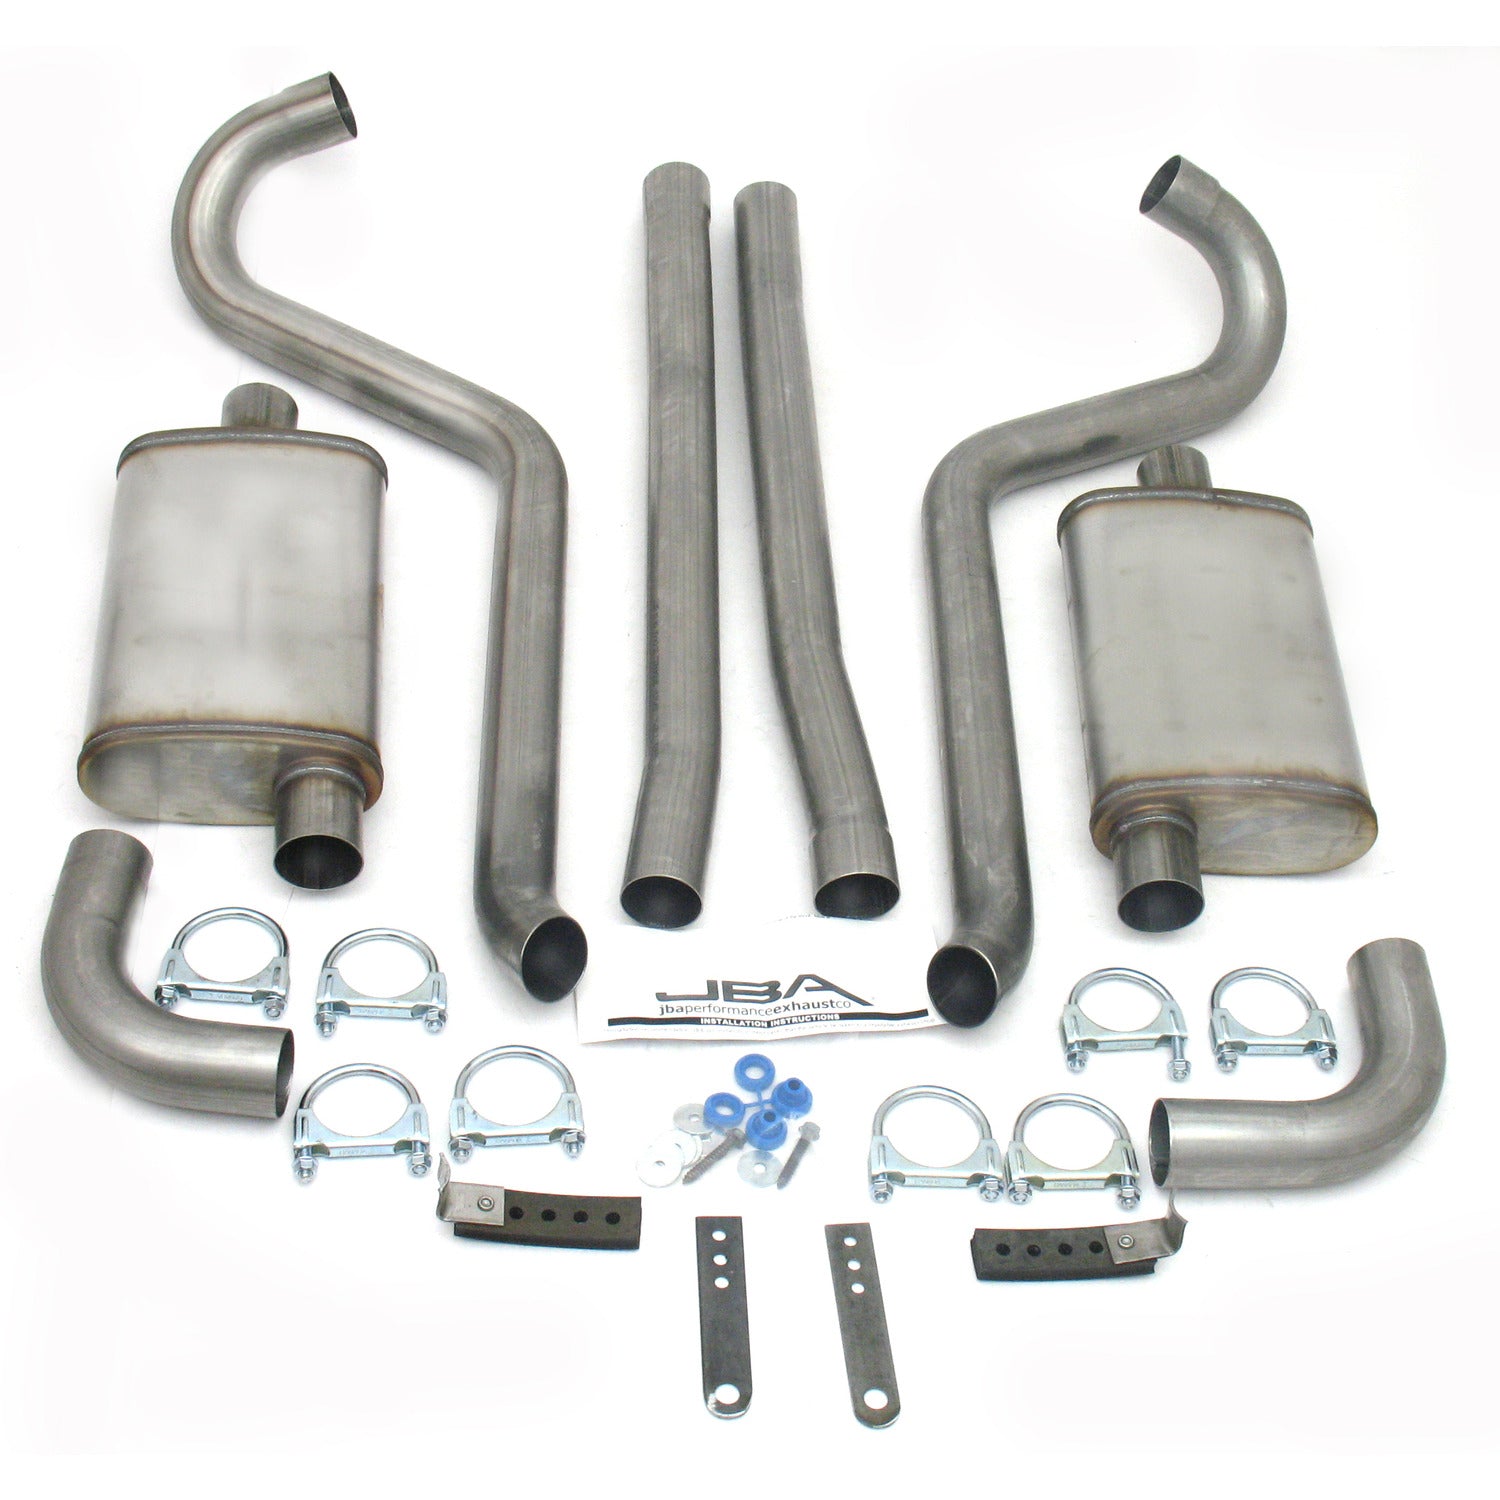 JBA Performance Exhaust 40-2650 2.5" Stainless Steel Exhaust System 65-70 Mustang Exhaust